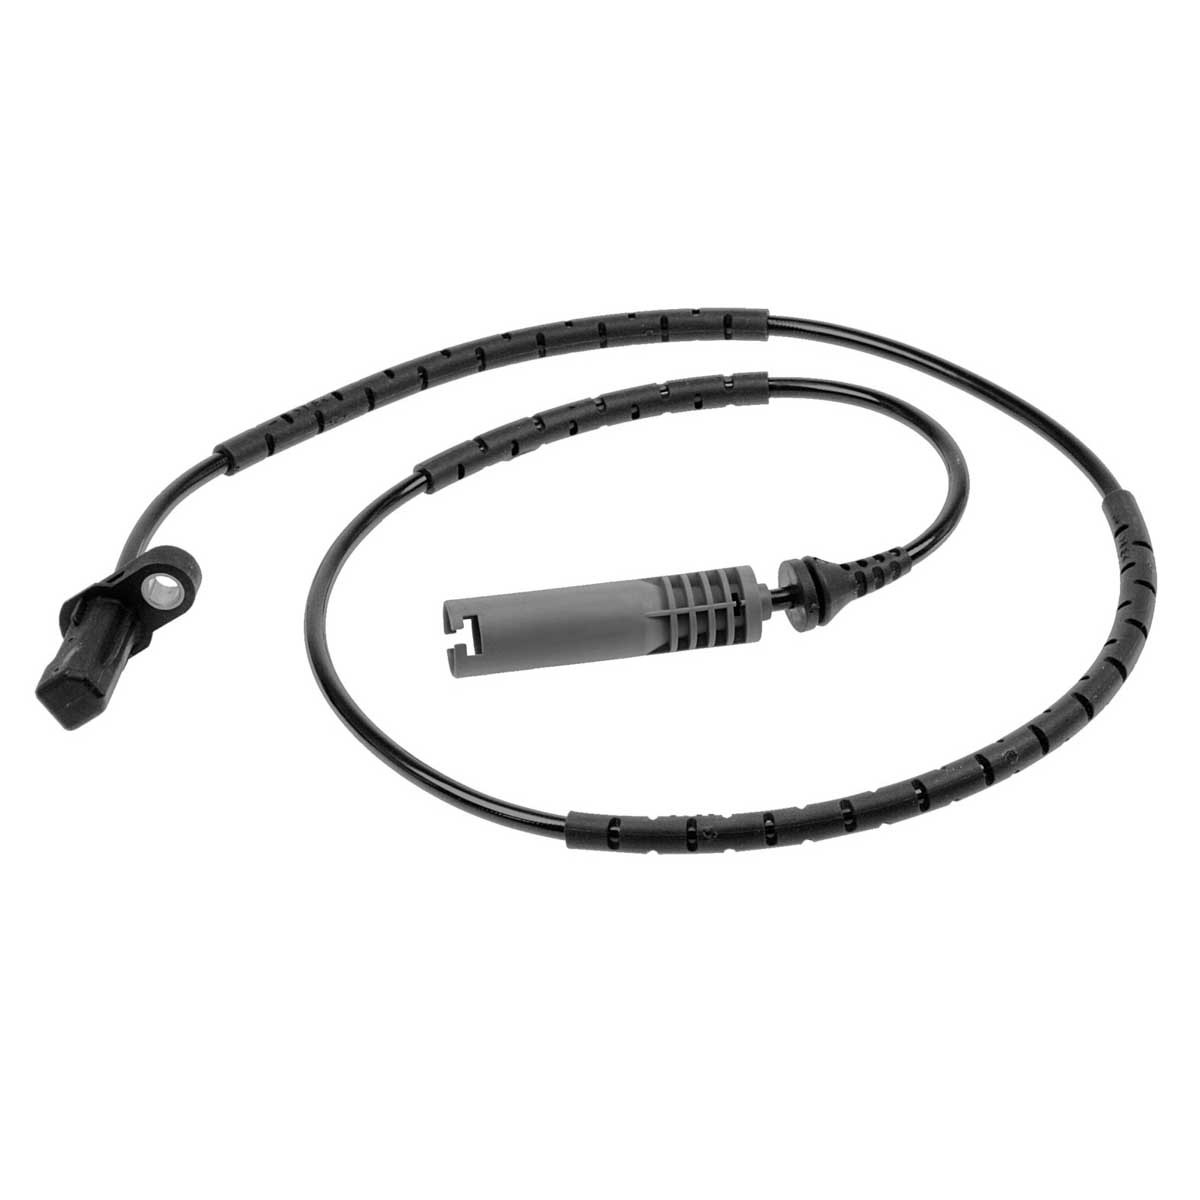 MEYLE 314 899 0034 ABS sensor LAND ROVER experience and price